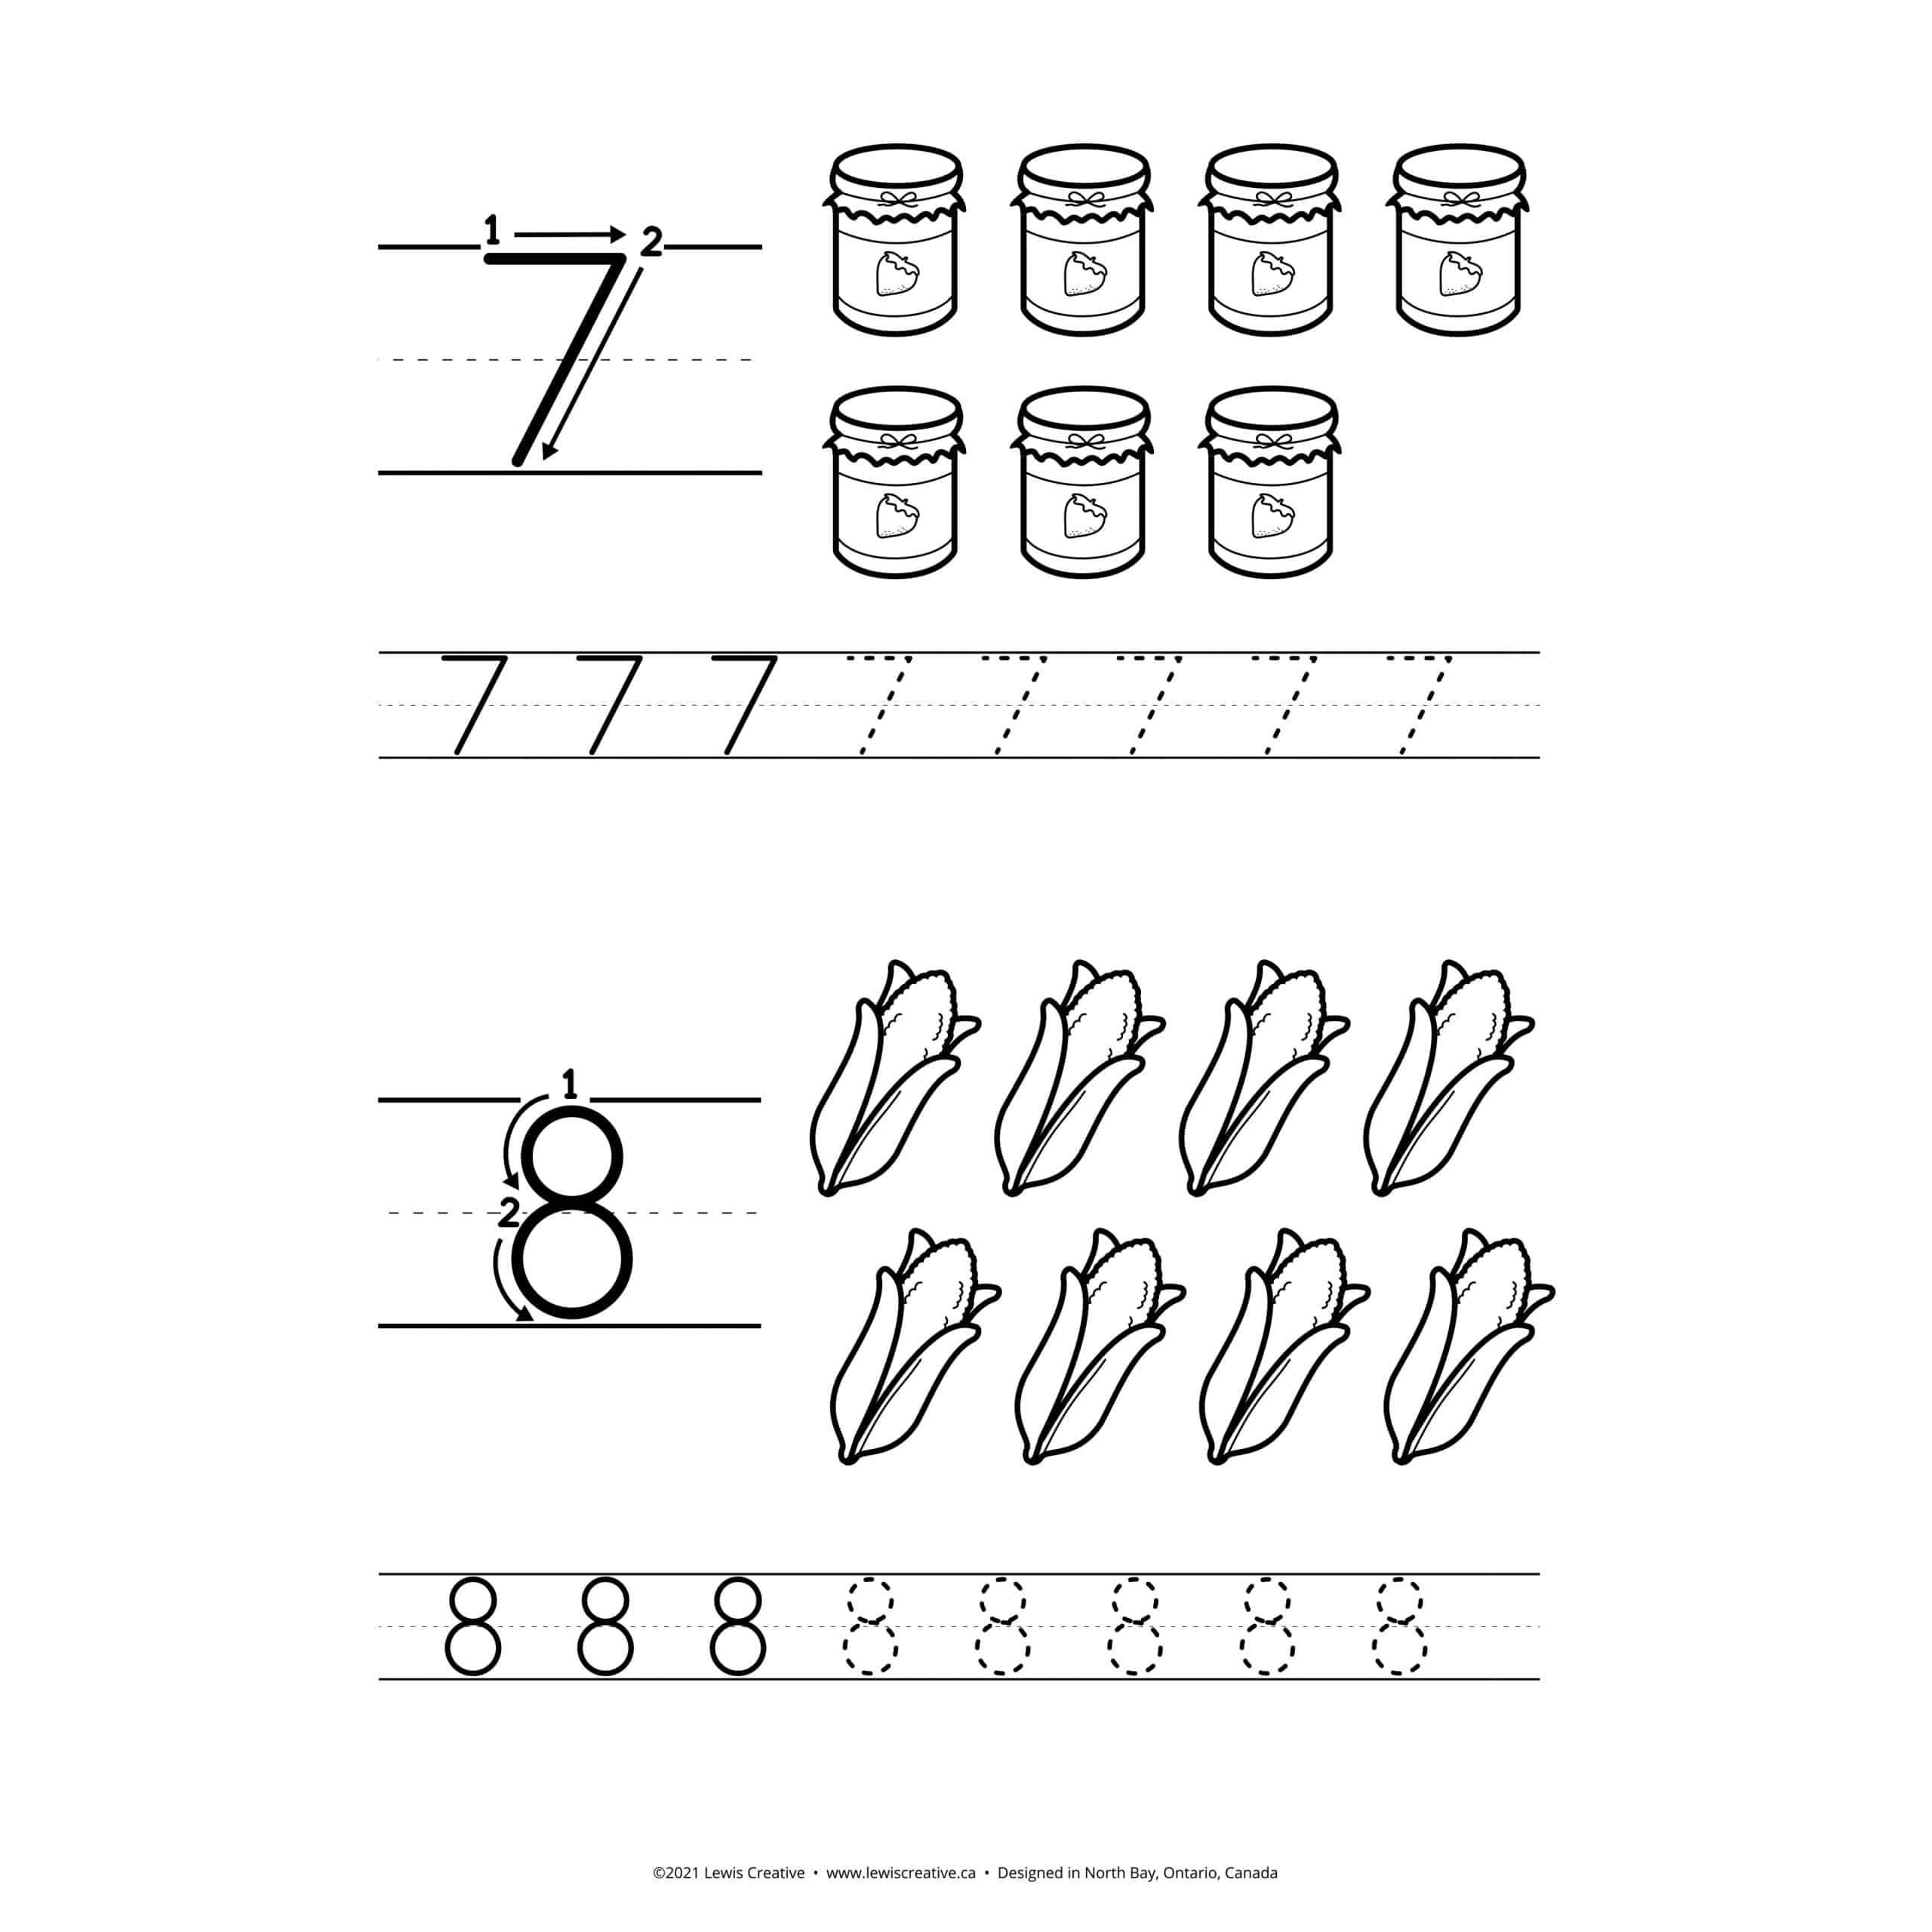 Count, Copy & Color • Fall Themed Number Tracing from 1 to 10 - Lewis ...